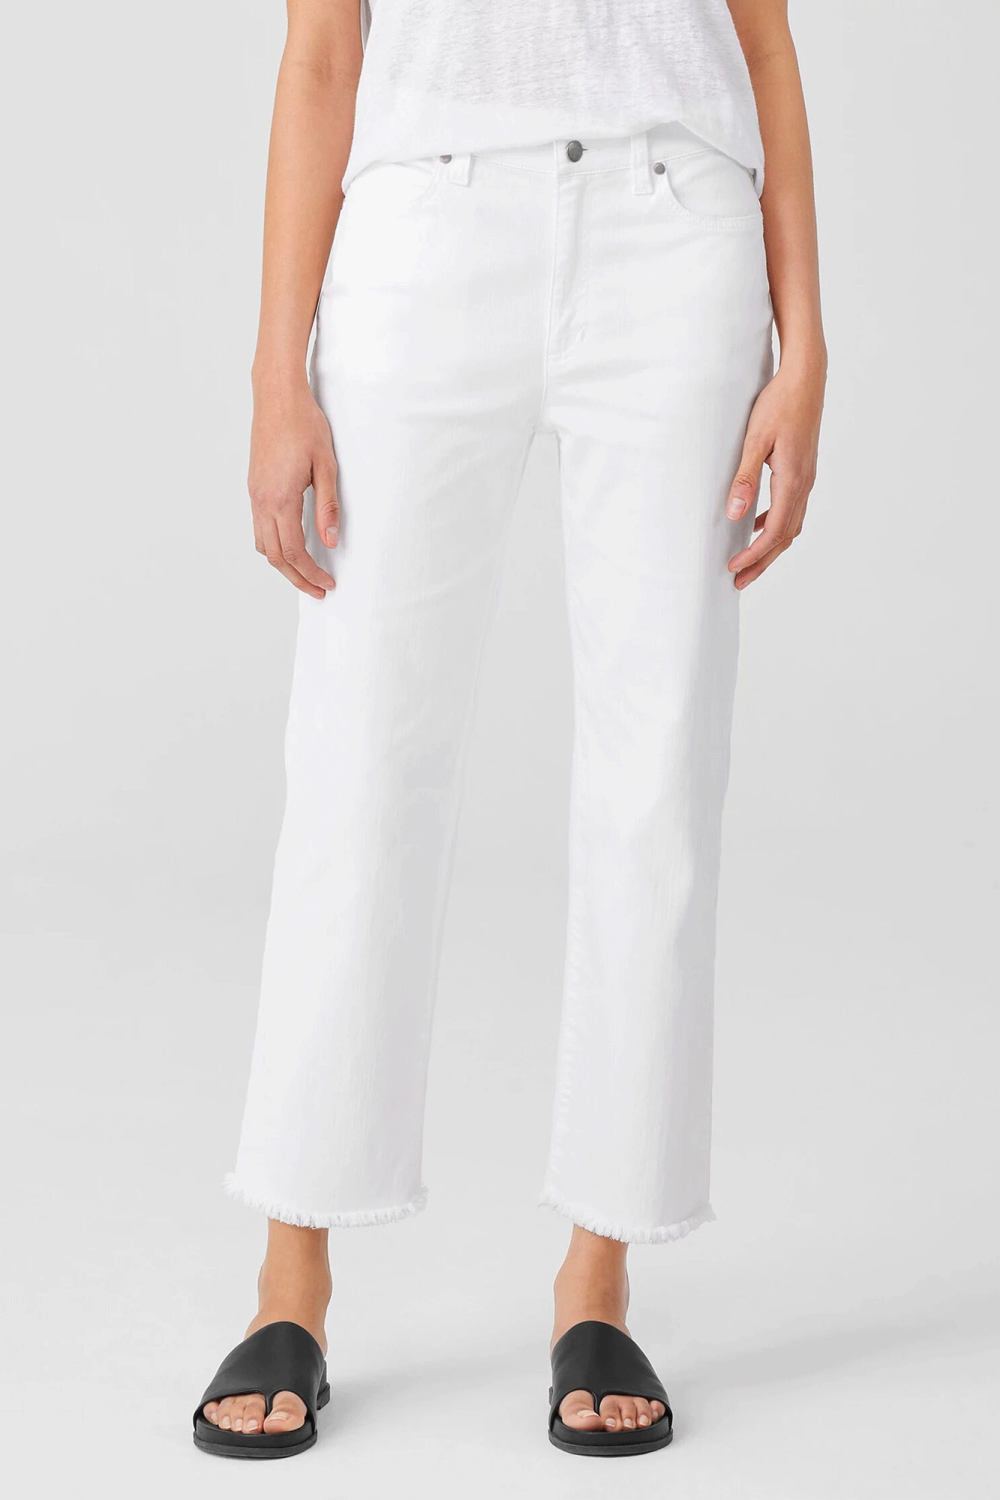 Straight Ankle Jean with Raw Edge | Eileen Fisher